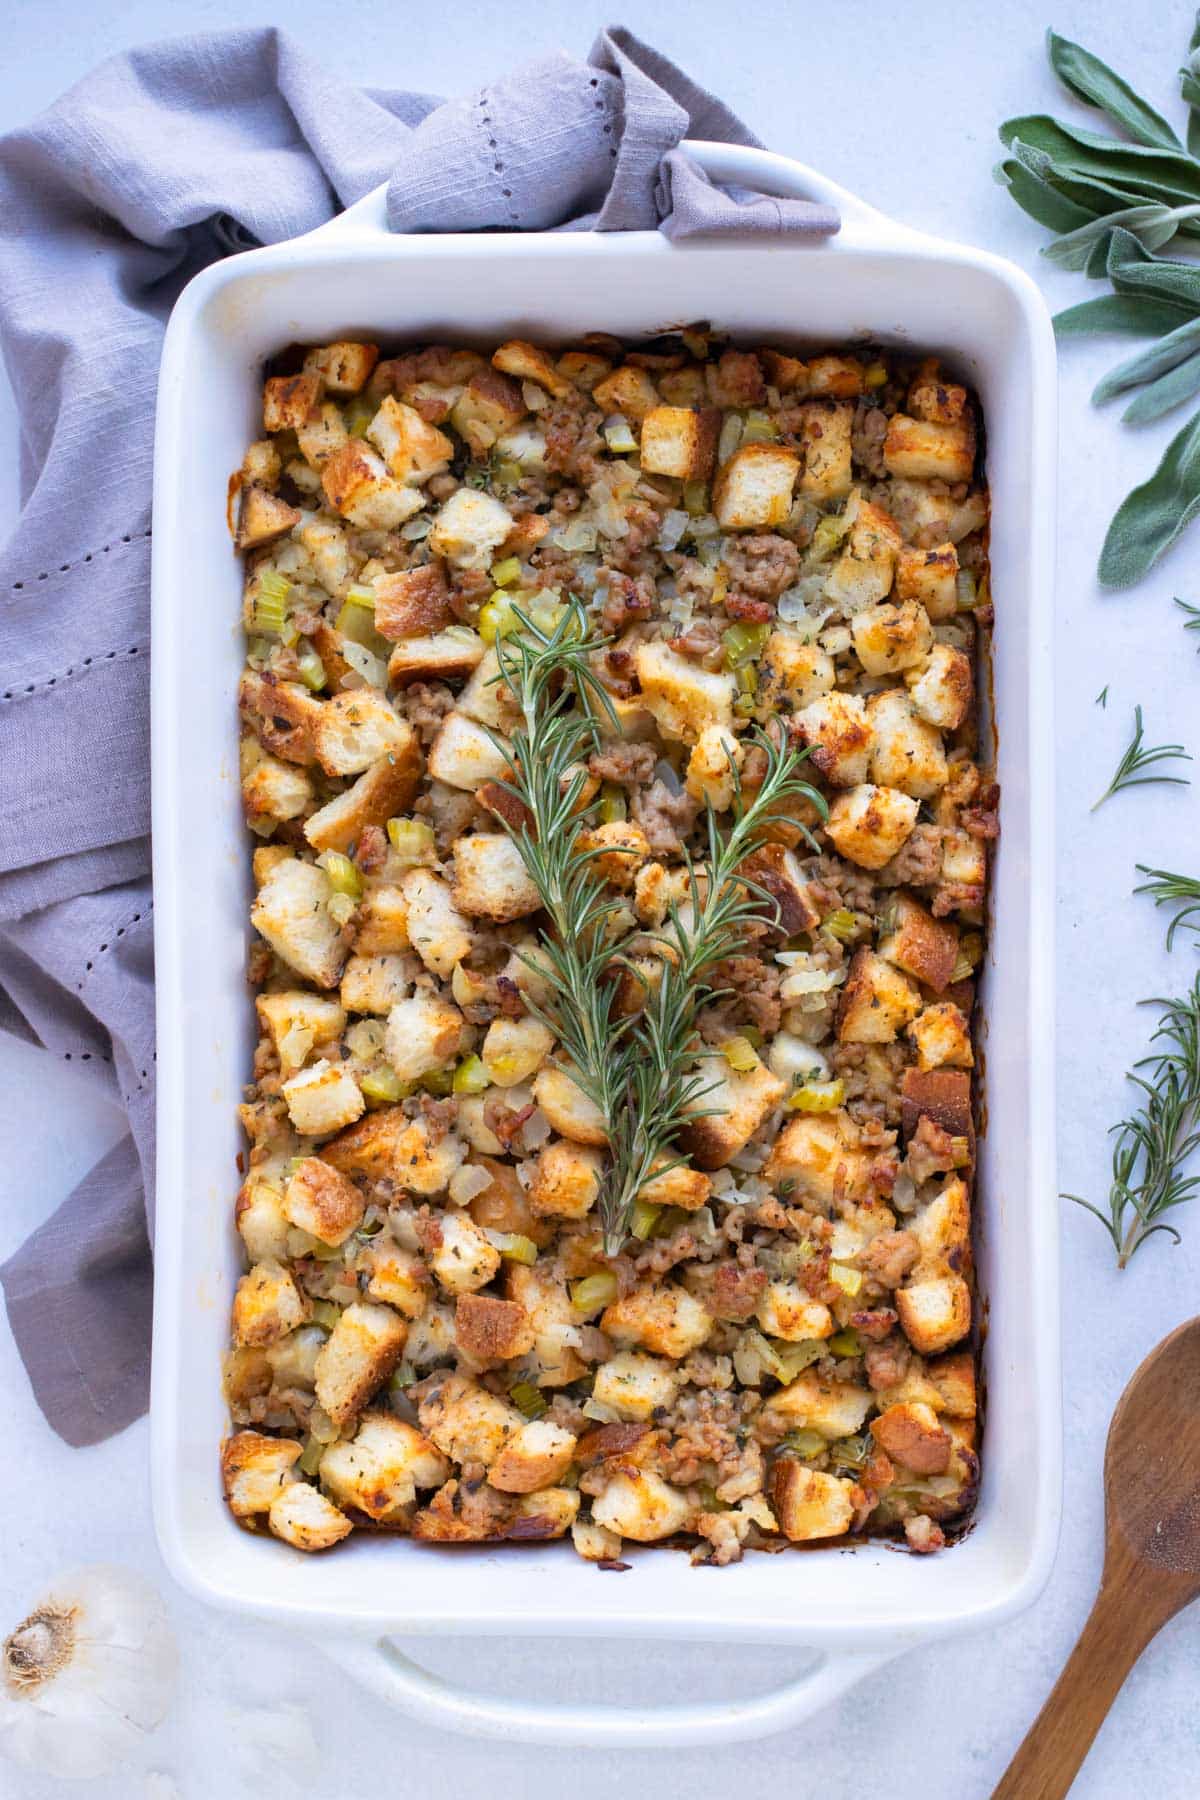 Sausage stuffing is served with fresh herbs and served at Thanksgiving.